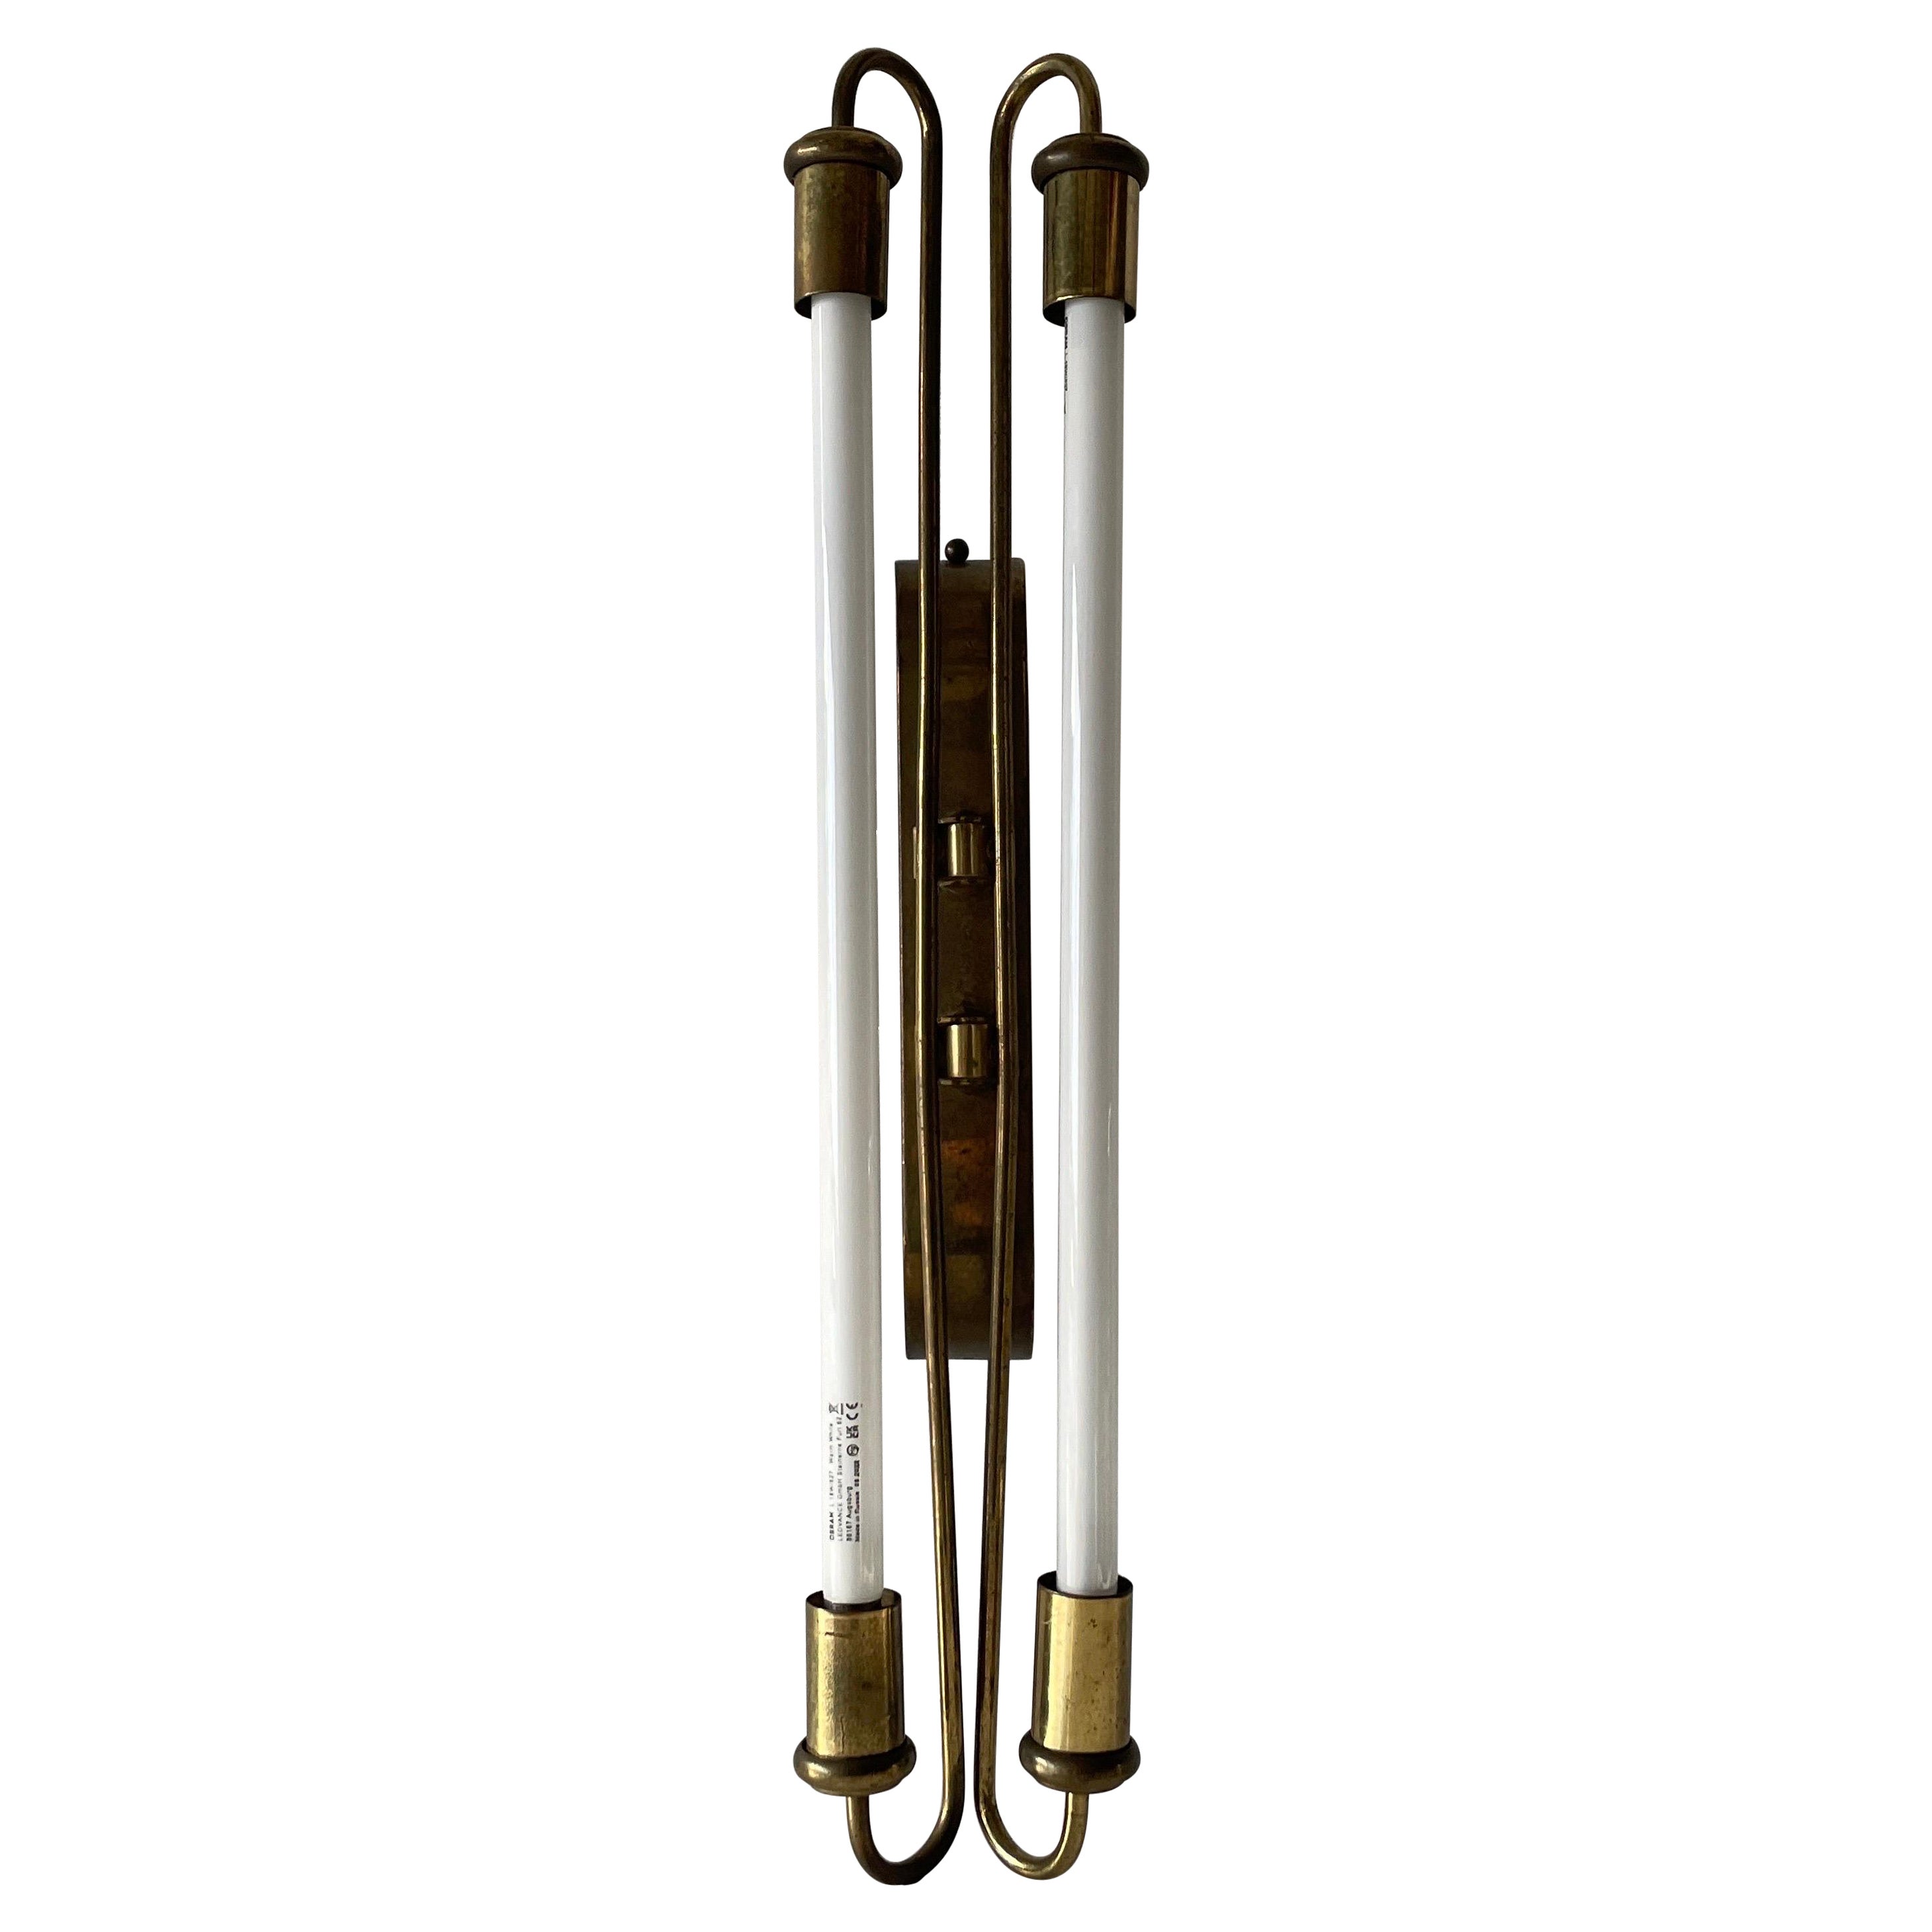 Art Deco Brass Industrial Cinema Sconce with Fluorescent Tubes, 1930s, Germany For Sale